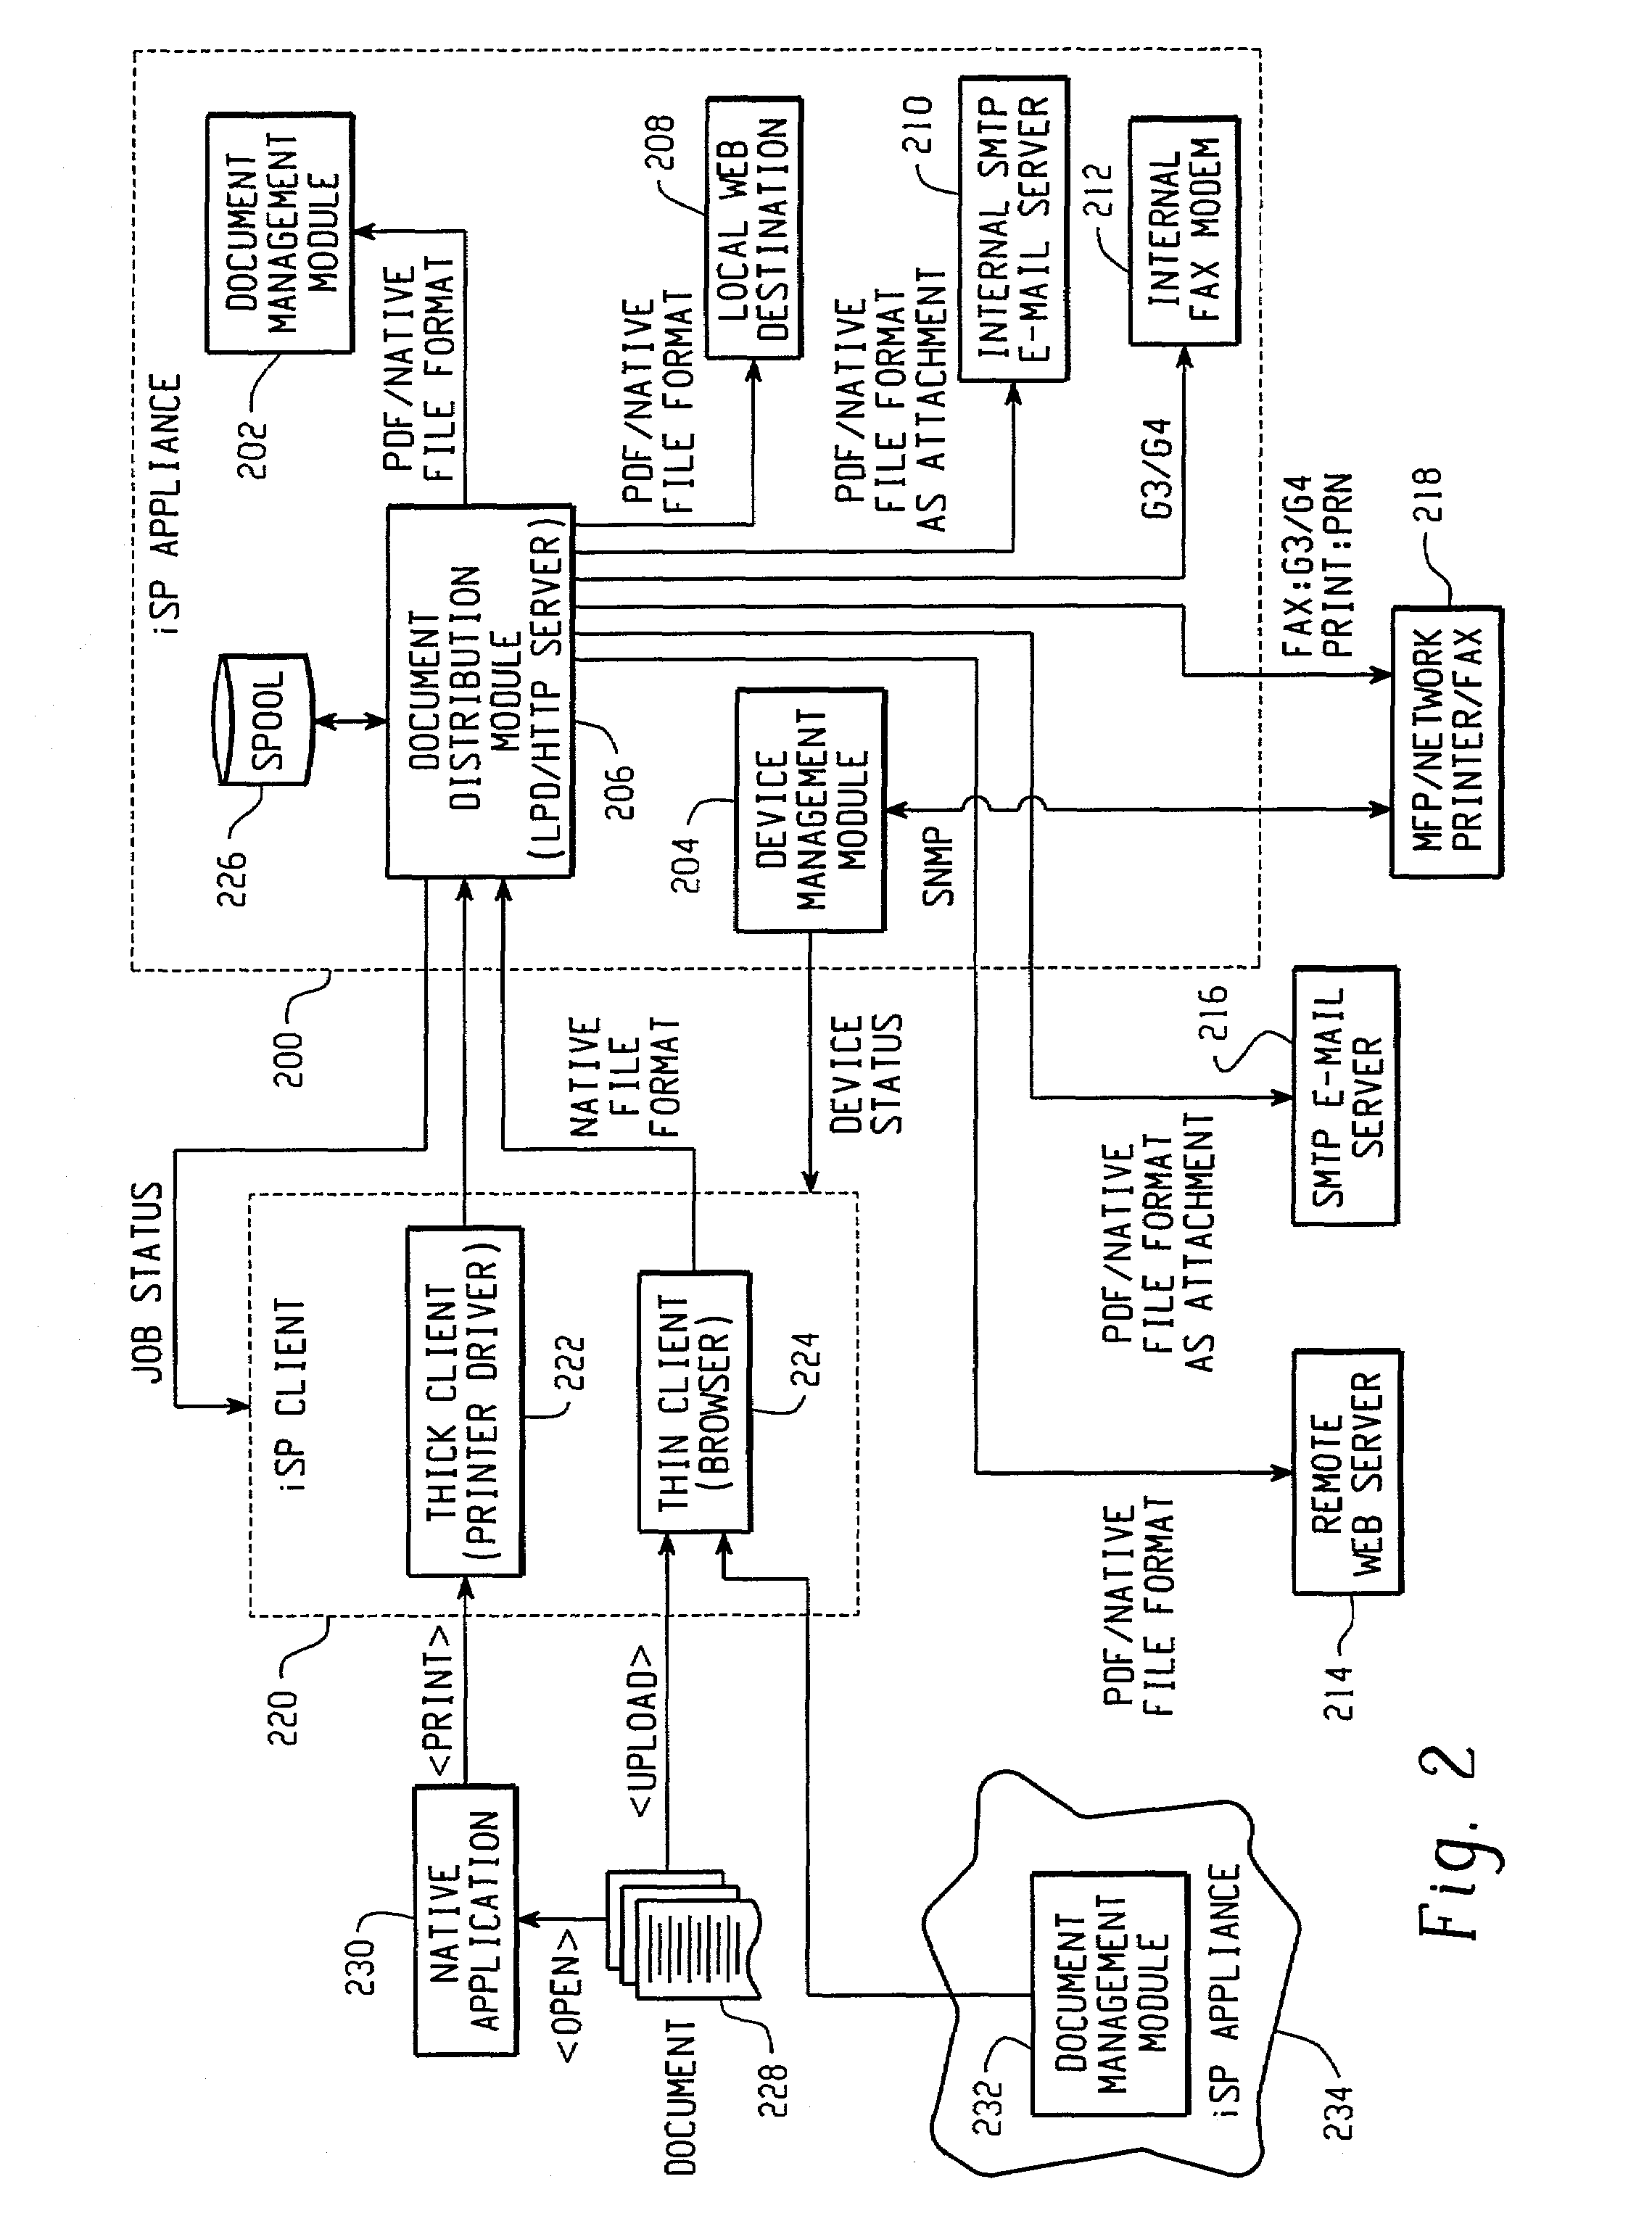 System and method of managing documents using bookmarks